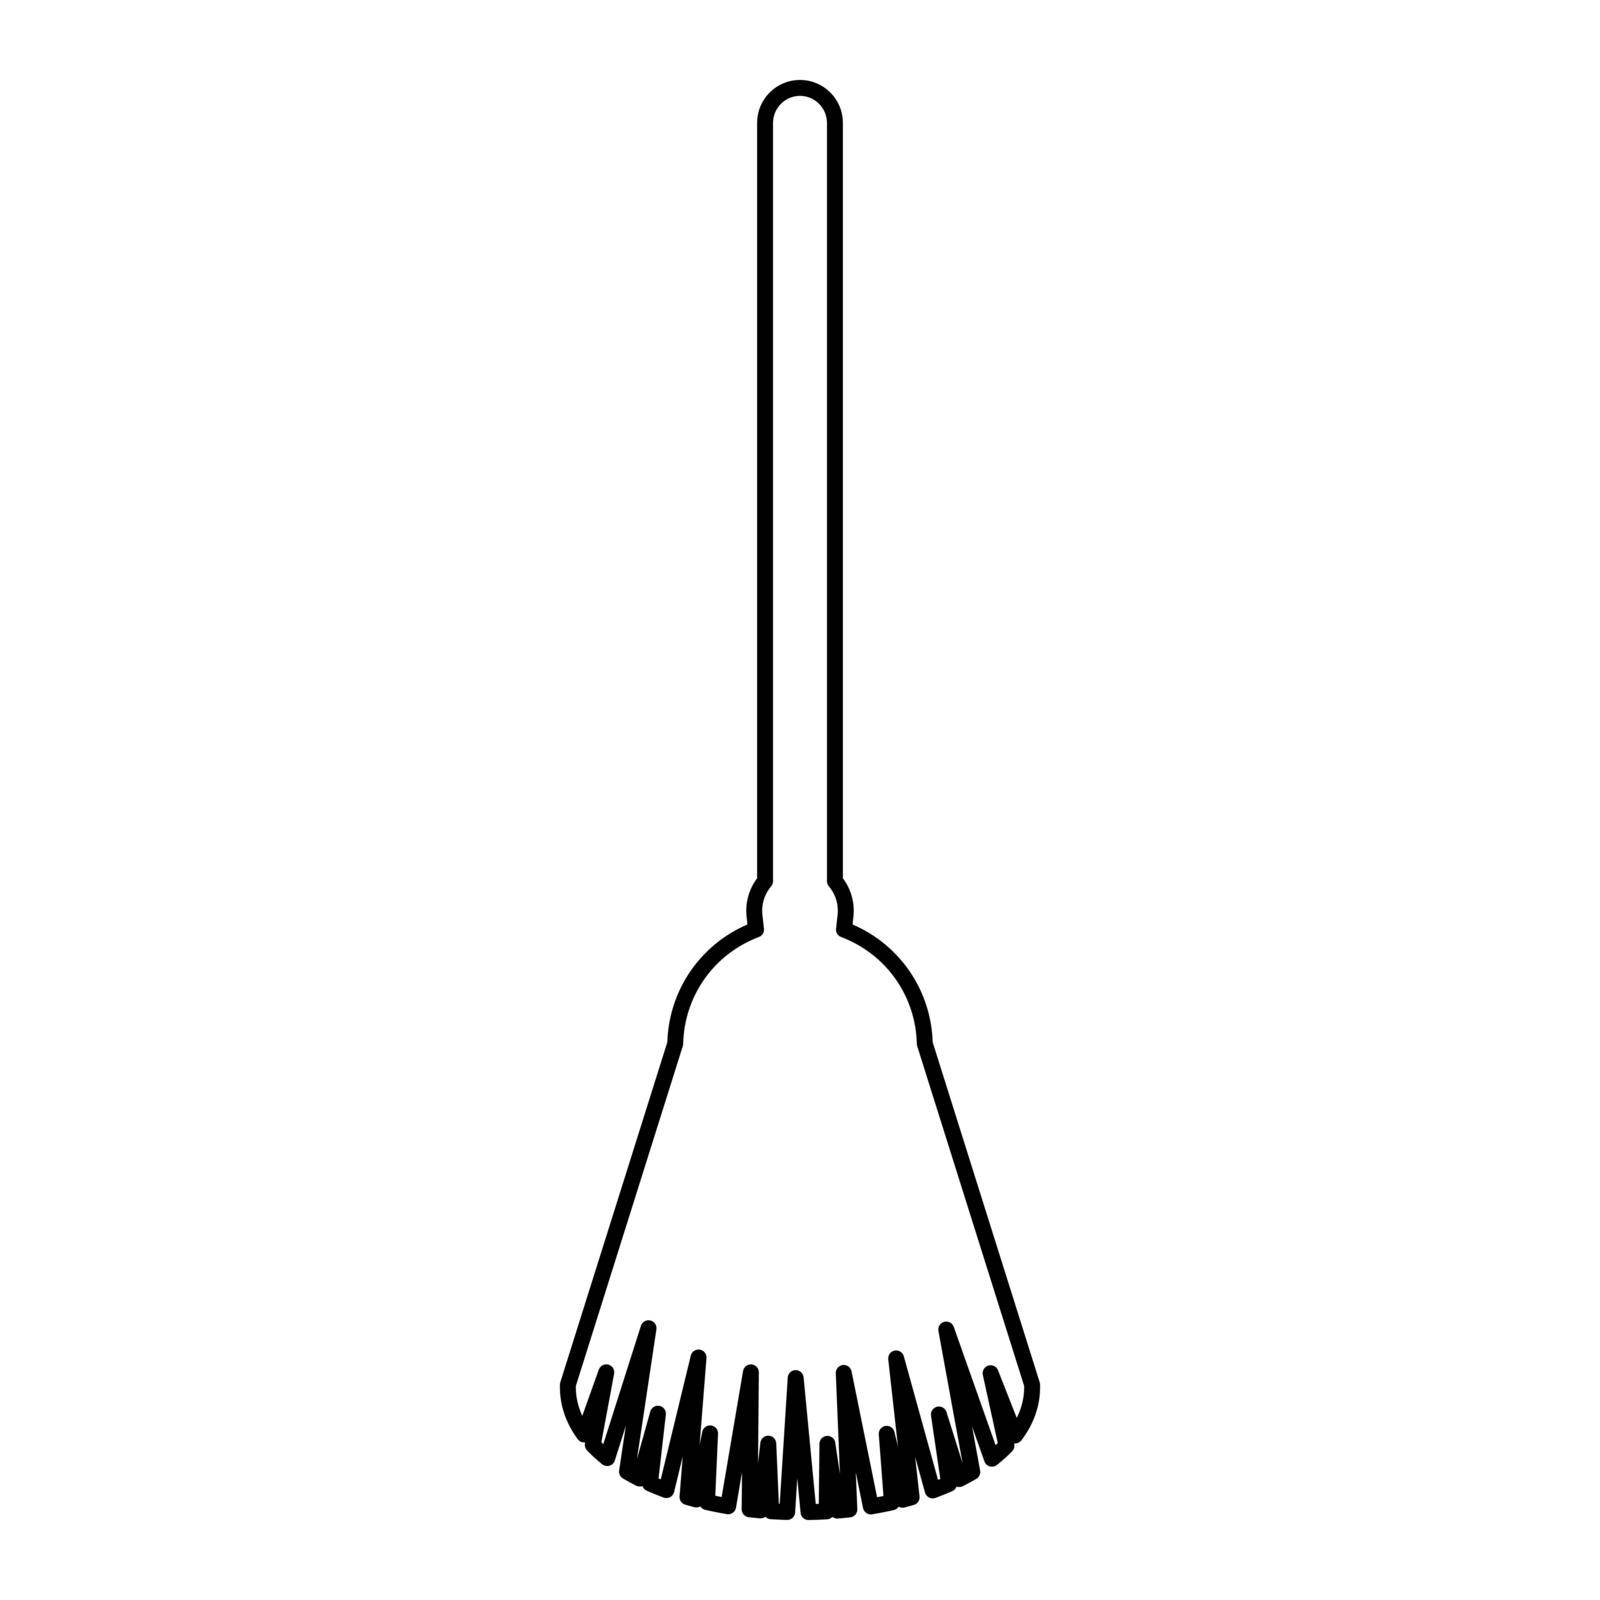 Broom Besom made from twigs Tool for cleaning Sweep concept Panicle Halloween accessory contour outline icon black color vector illustration flat style simple image